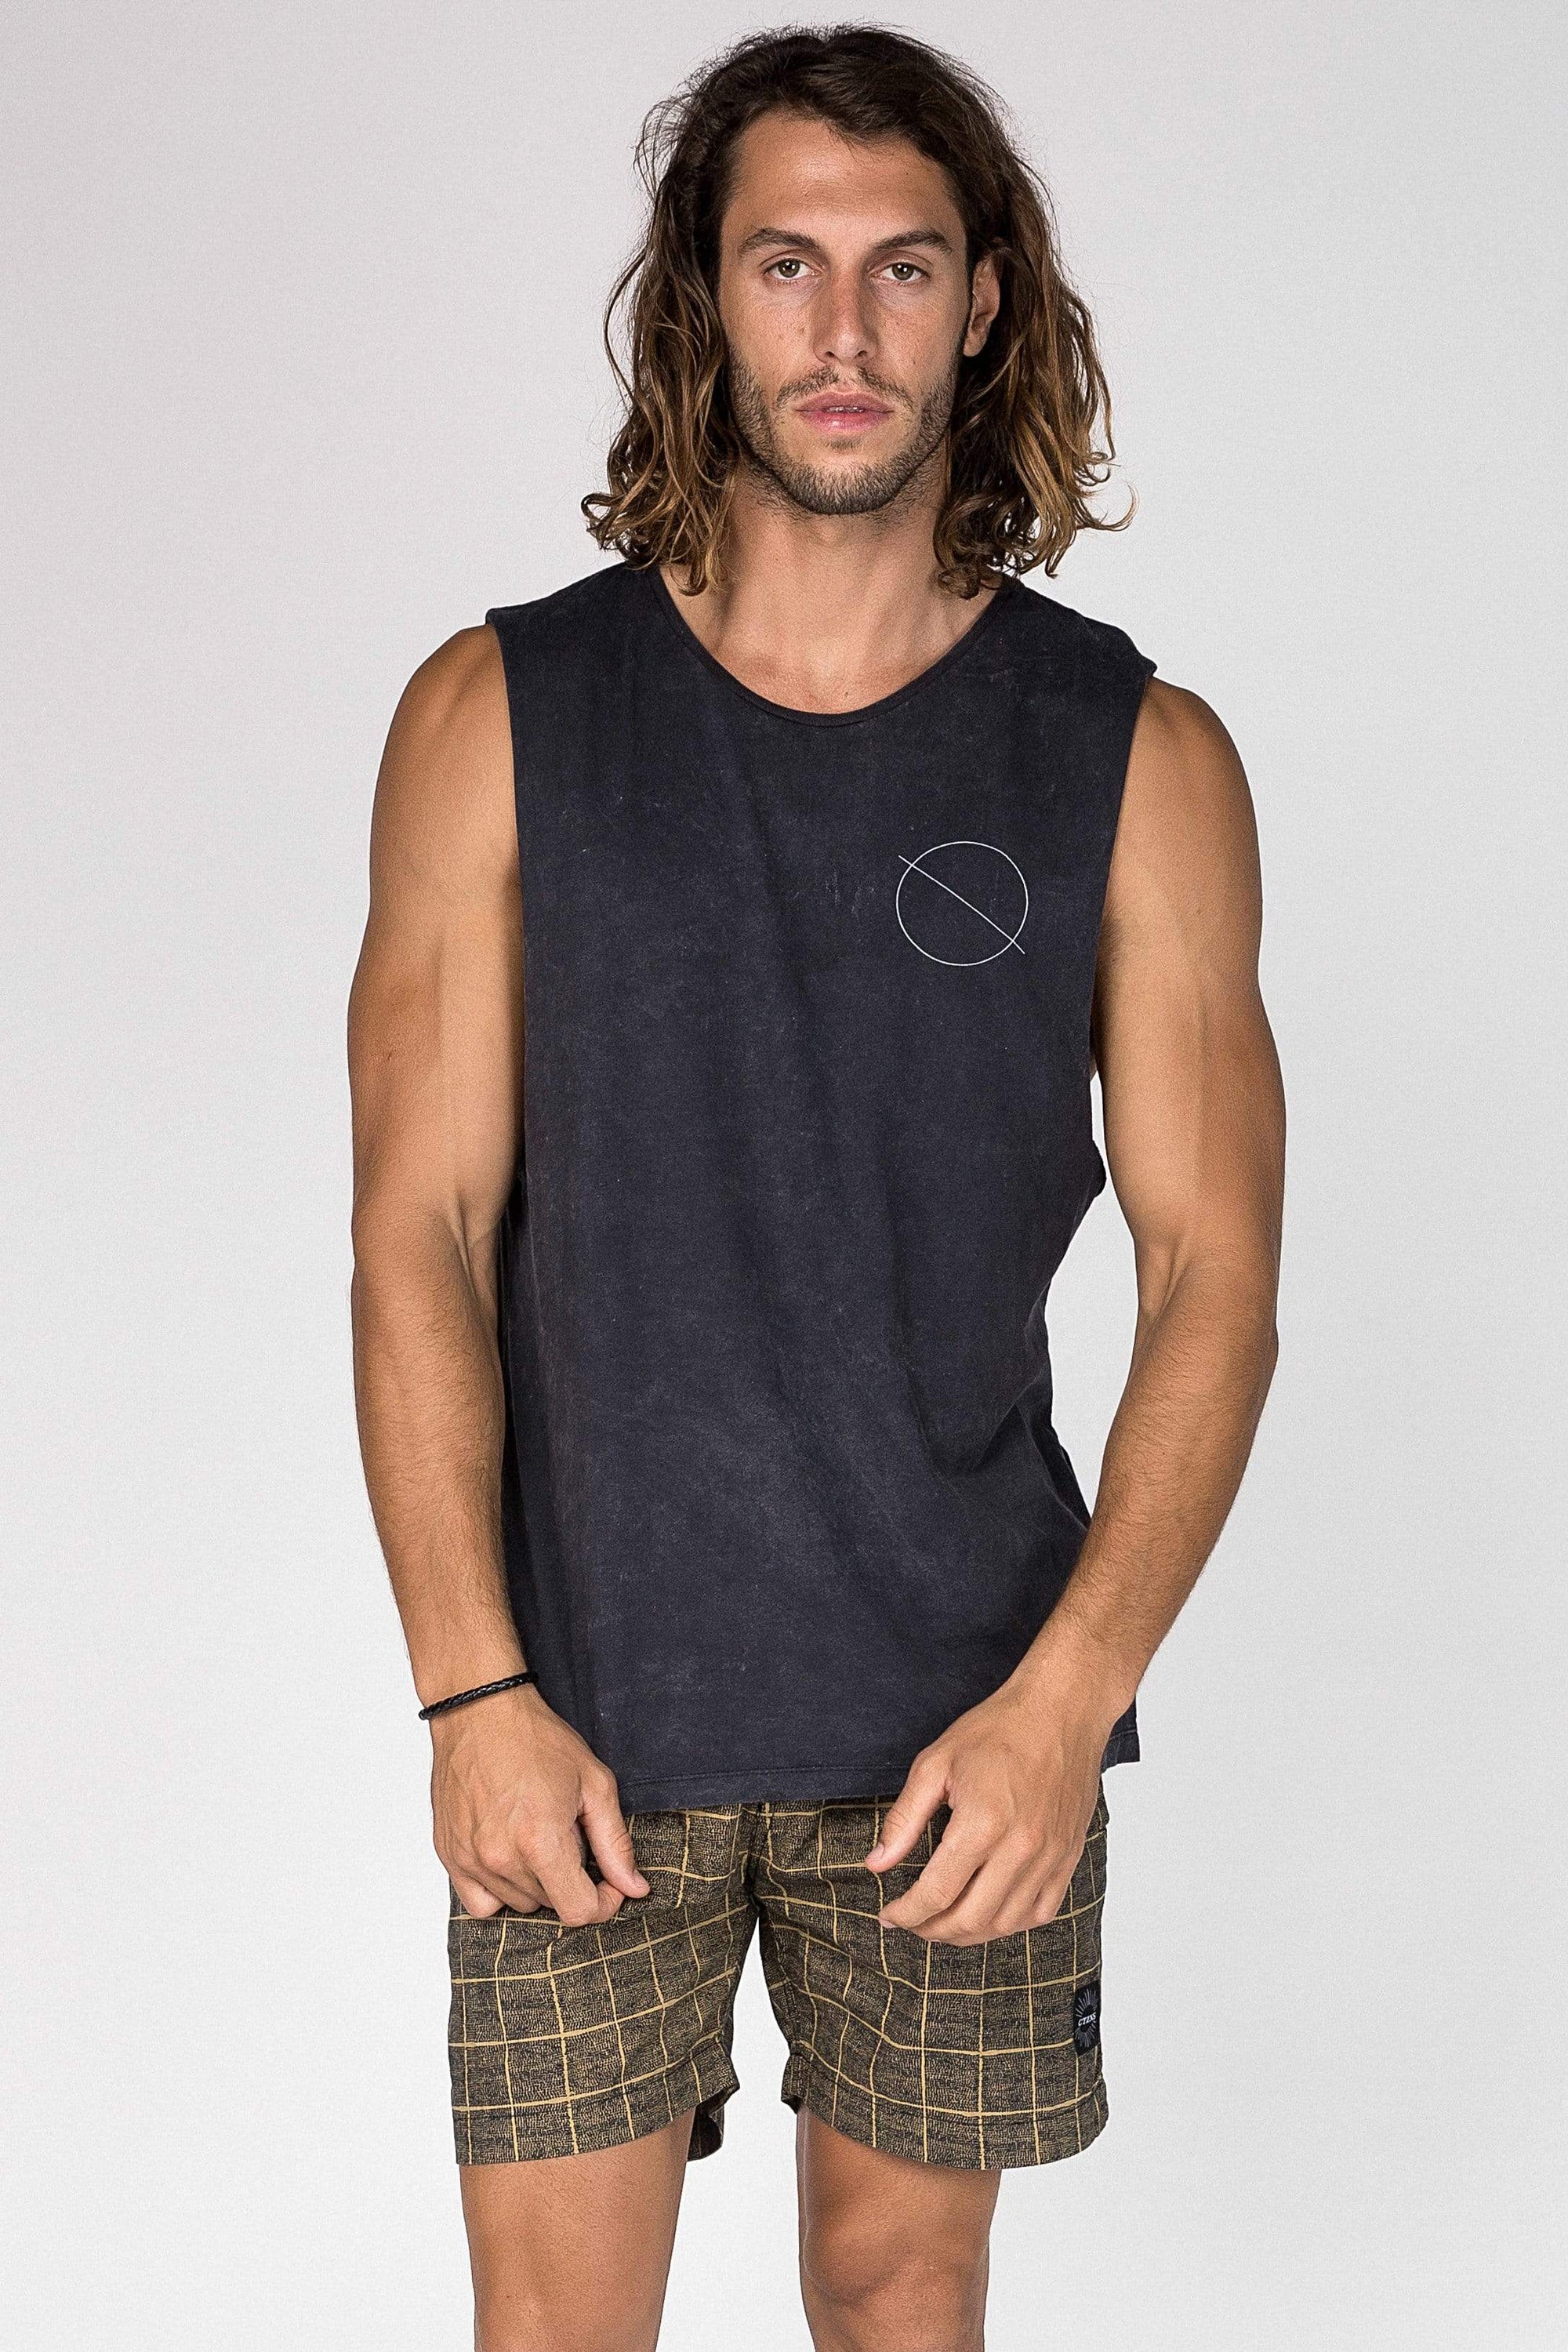 Lvm Without Truth Circle - Mens Muscle Tank - VERITAS & LIBERTE